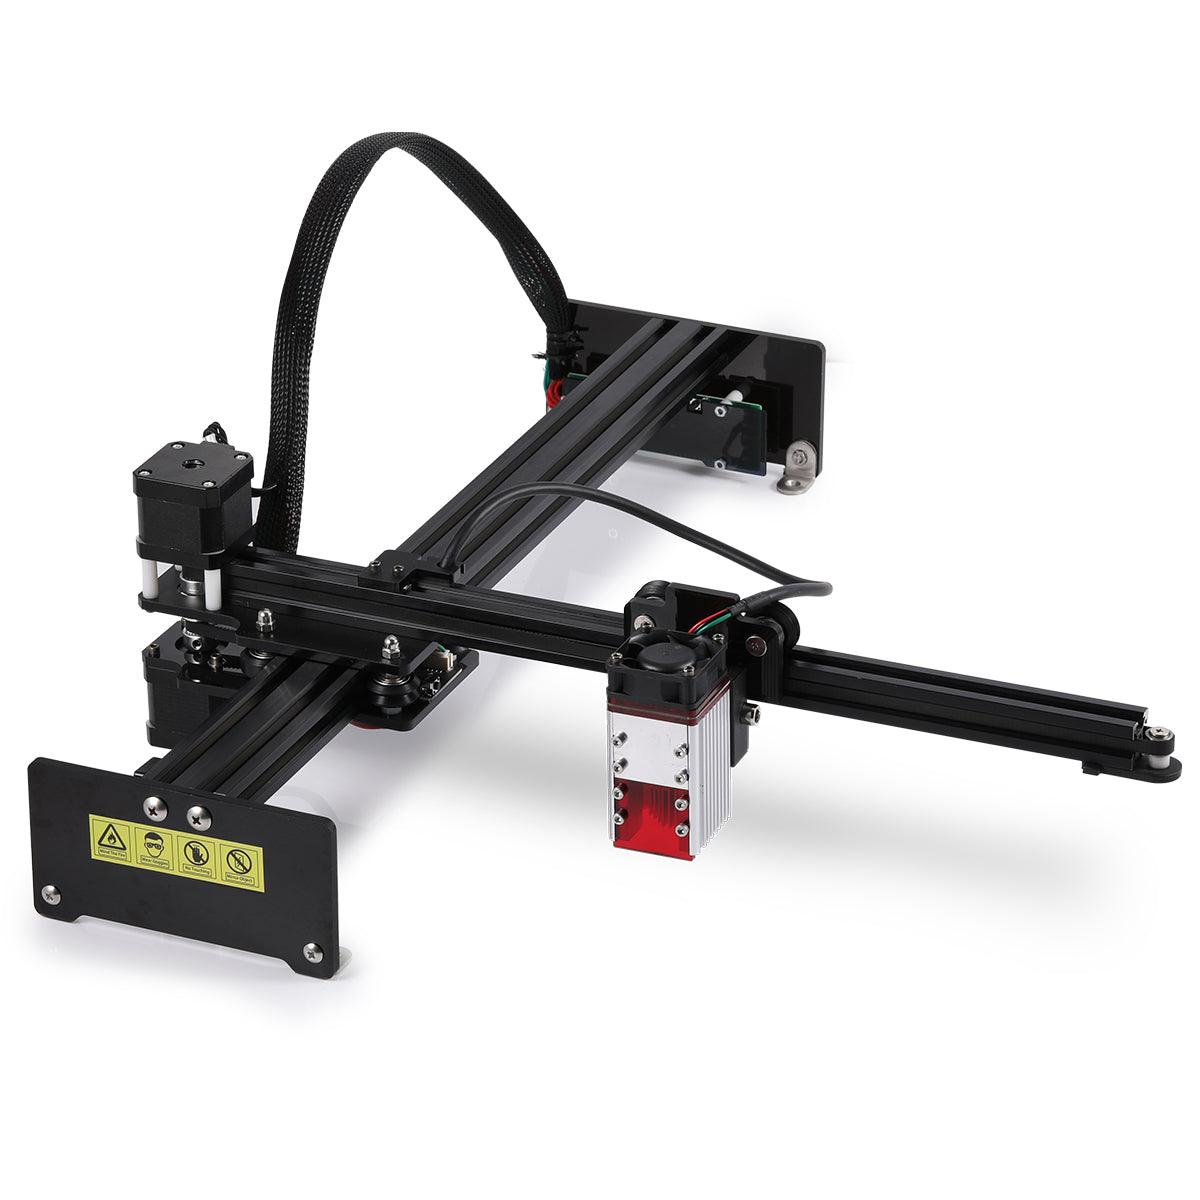 NEJE 3 Plus: Diode Laser Engraver and Cutter - 255x420mm